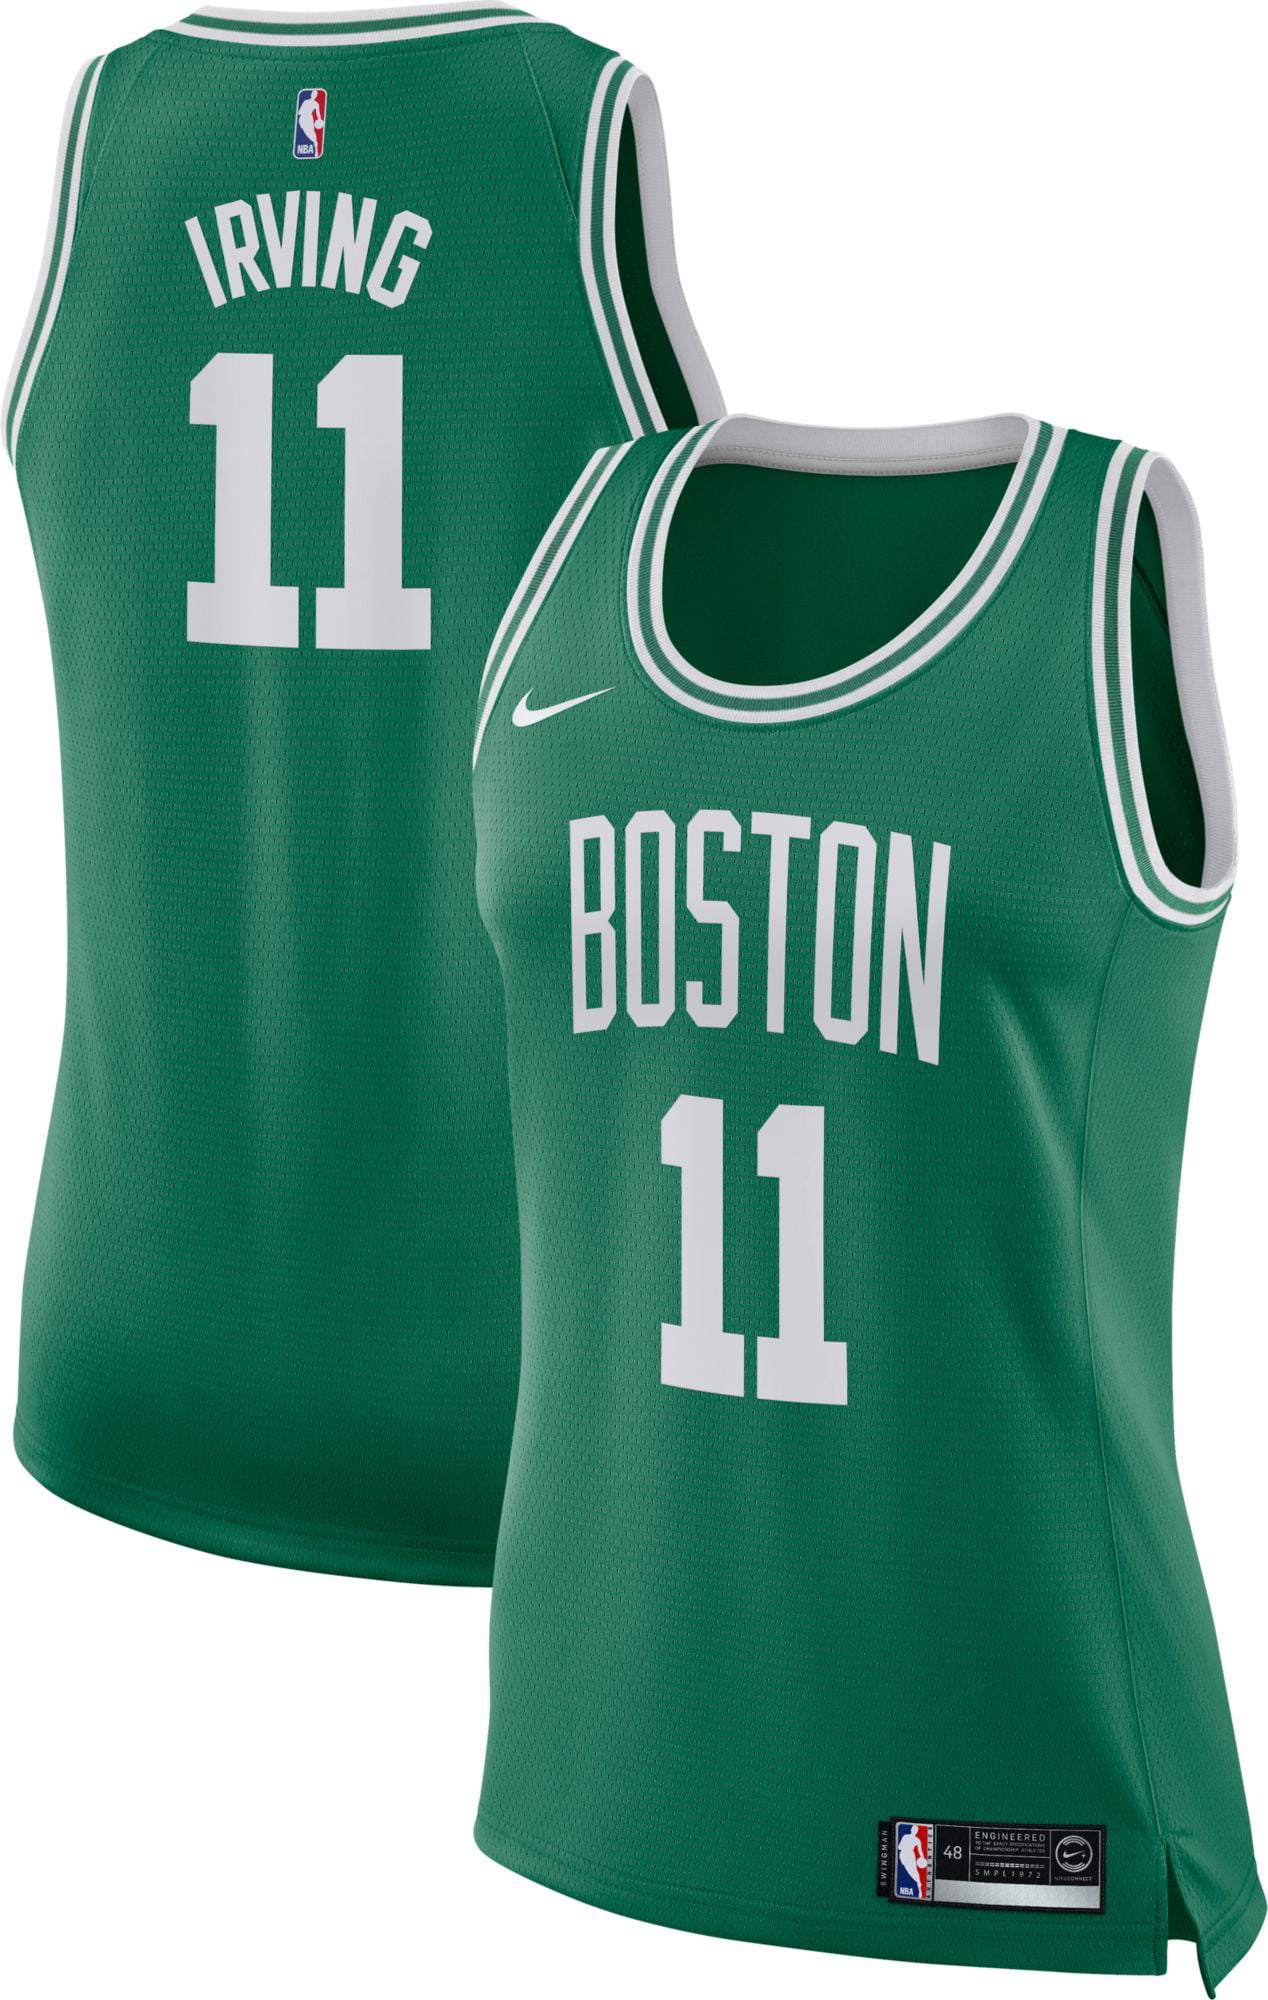 womens kyrie irving jersey